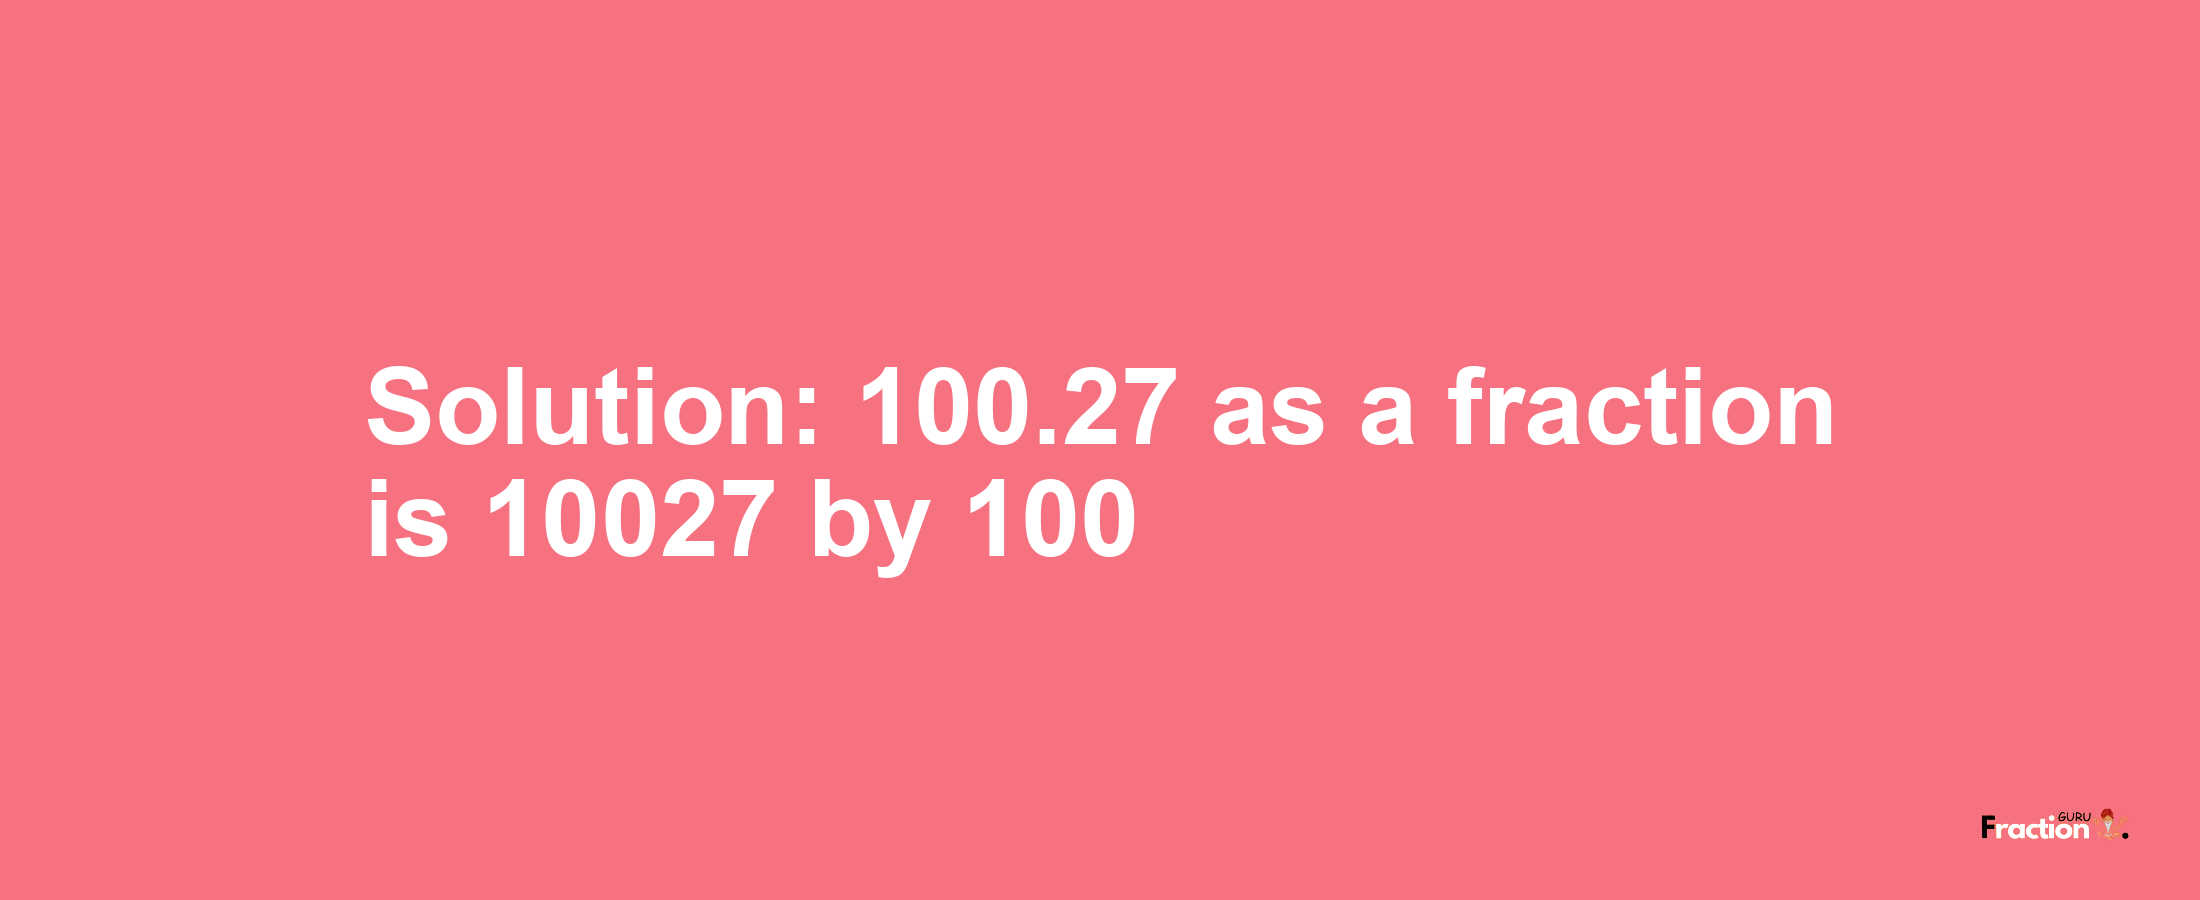 Solution:100.27 as a fraction is 10027/100